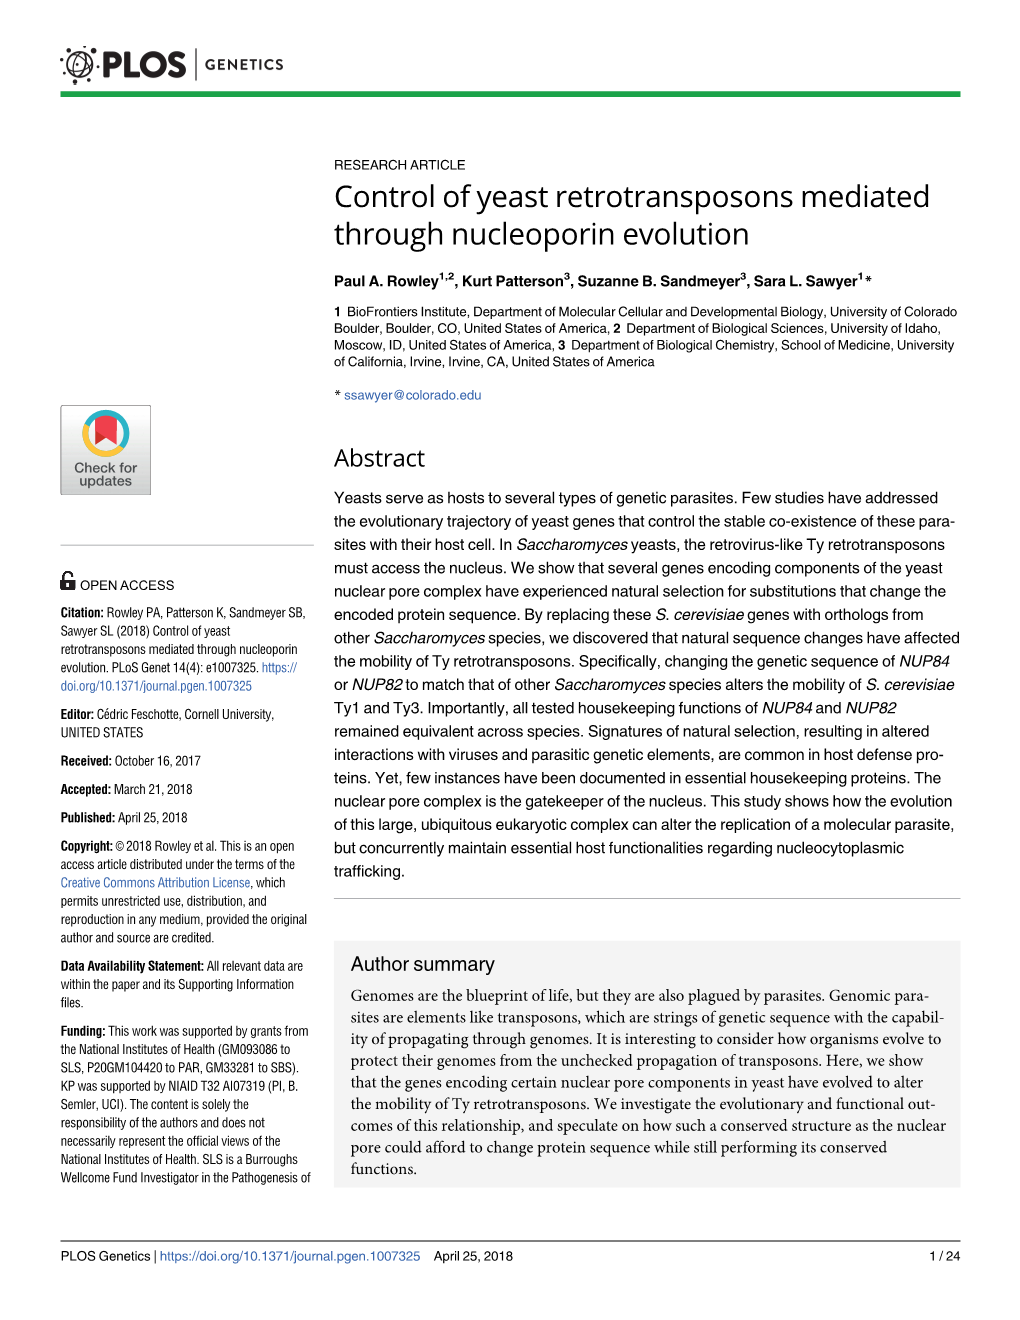 Control of Yeast Retrotransposons Mediated Through Nucleoporin Evolution